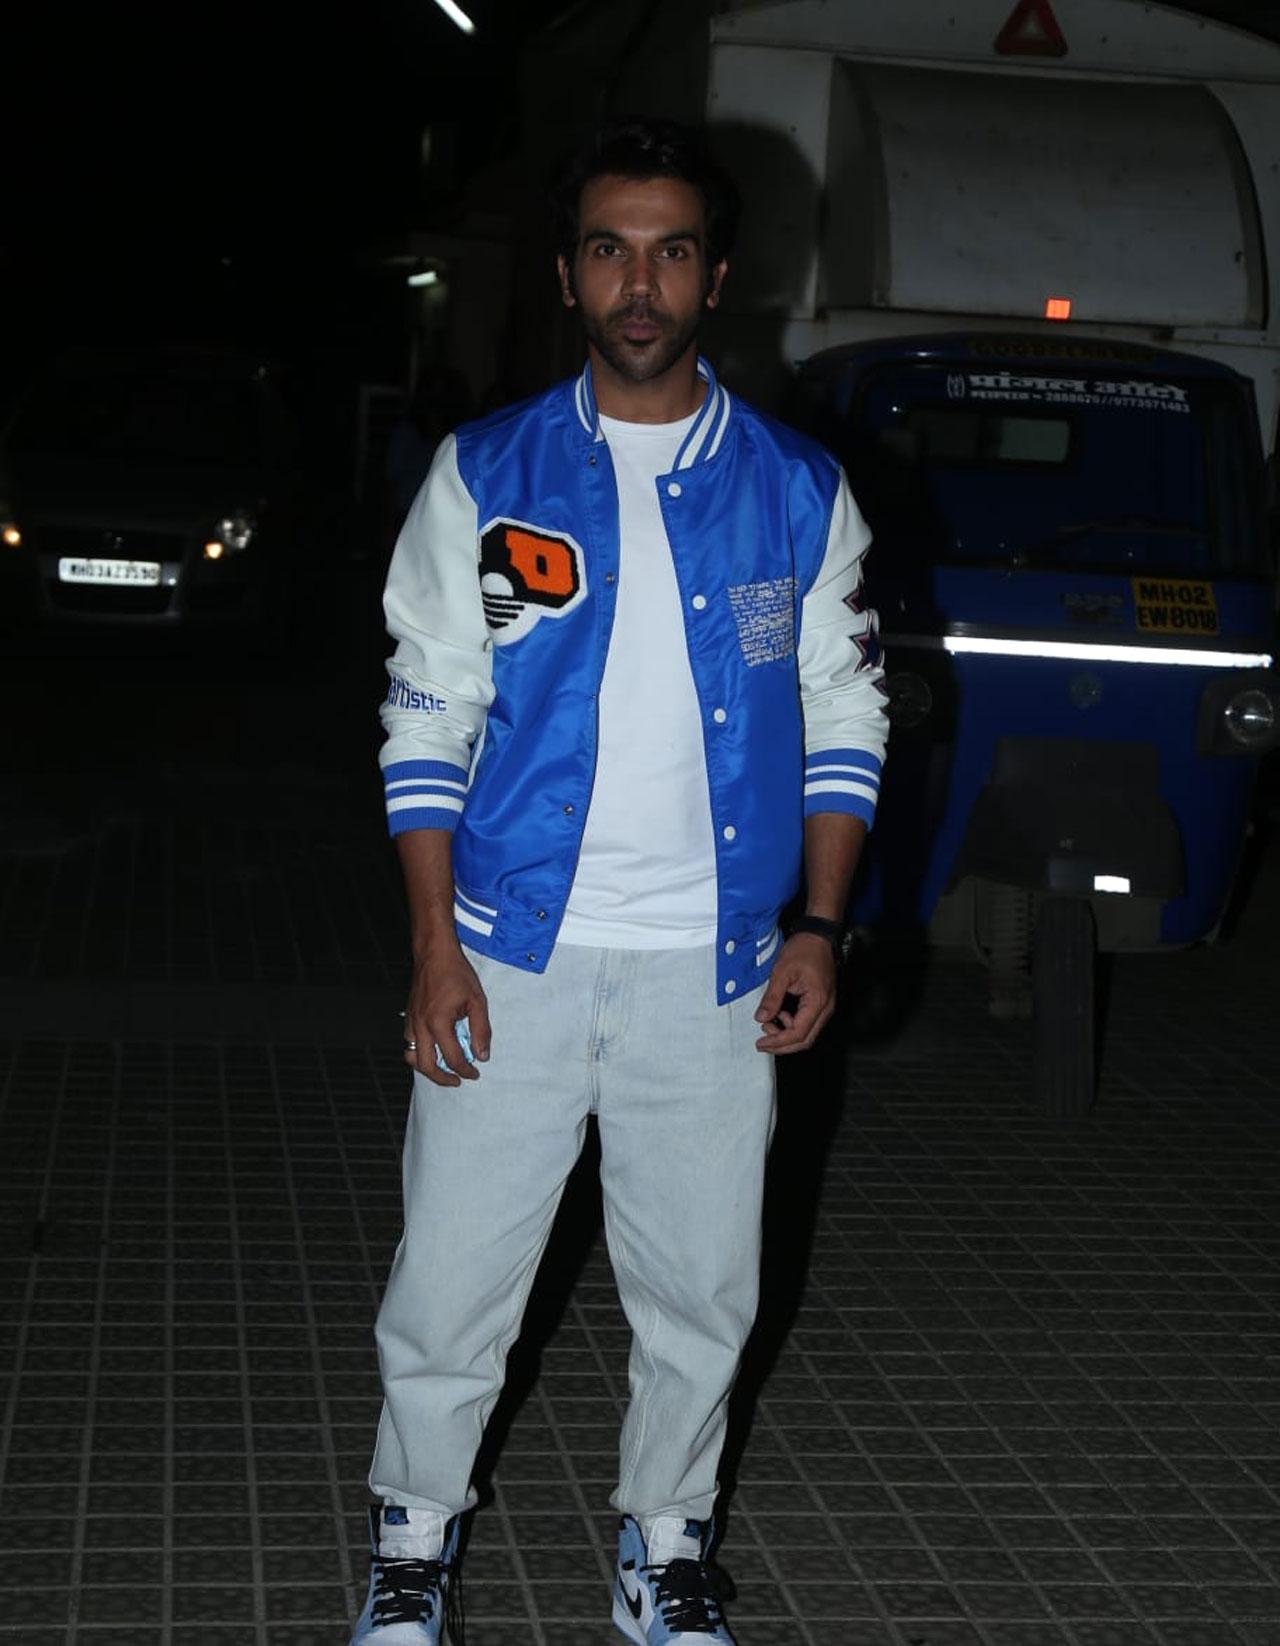 Rajkummar Rao too was seen in a blue-and-white jacket and kept it casual and cool as usual. He also plays a homosexual character who's a cop. Besides Rajkummar and Bhumi, the family entertainer also boasts of an ensemble cast featuring seasoned actors like Seema Pahwa, Sheeba Chadha, Lovleen Mishra, Nitish Pandey, Shashi Bhushan amongst others essaying pivotal roles.